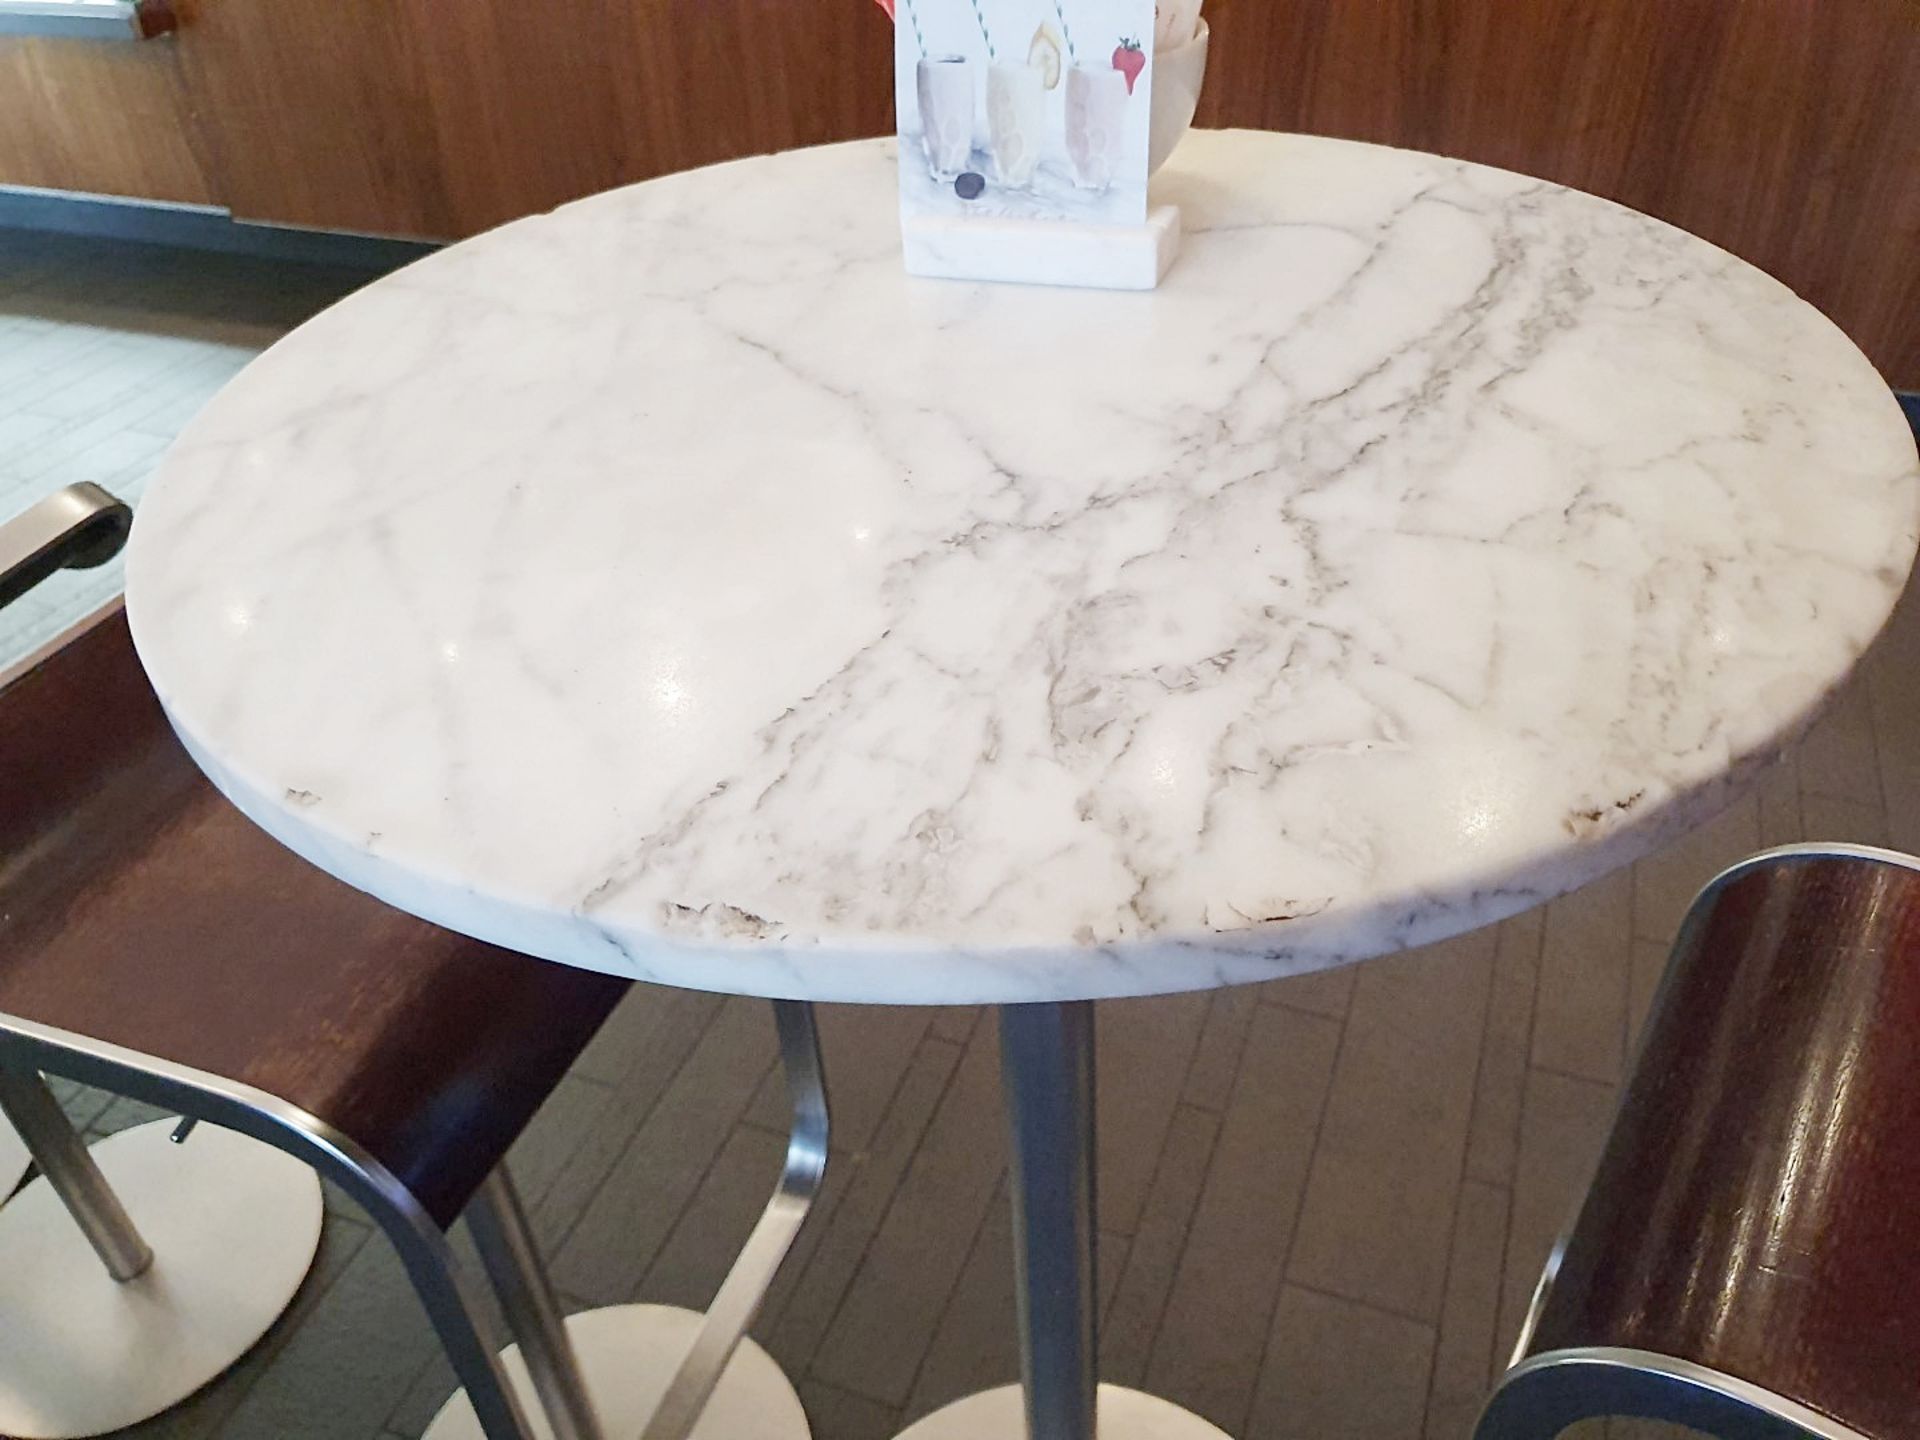 1 x Tall Round Marble/Granite Cocktail Bar Table - Dimensions: Diameter 60cm x Height 111cm - Ref: - Image 2 of 6